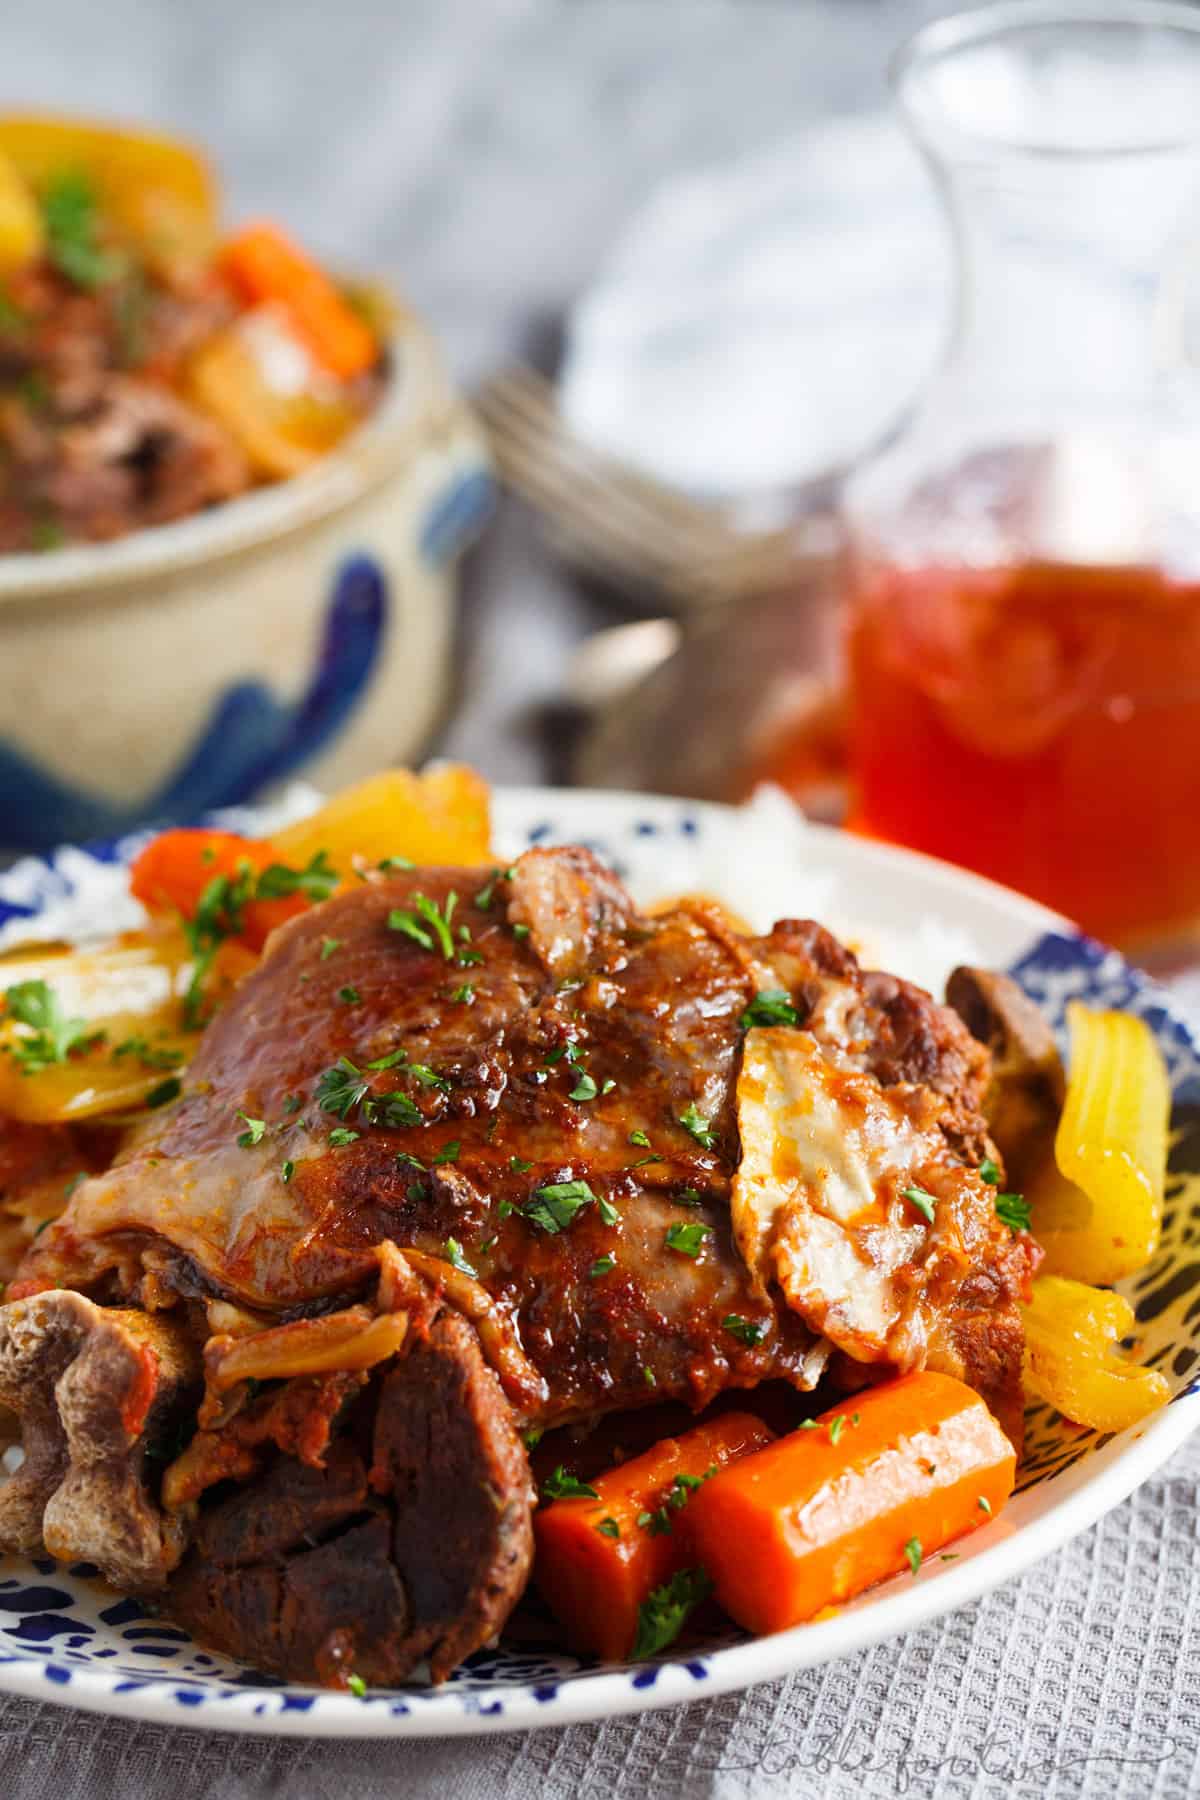 Slow cooker osso buco is unbelievably tender and full of flavor. There is nothing intimidating about making this restaurant favorite at home! 